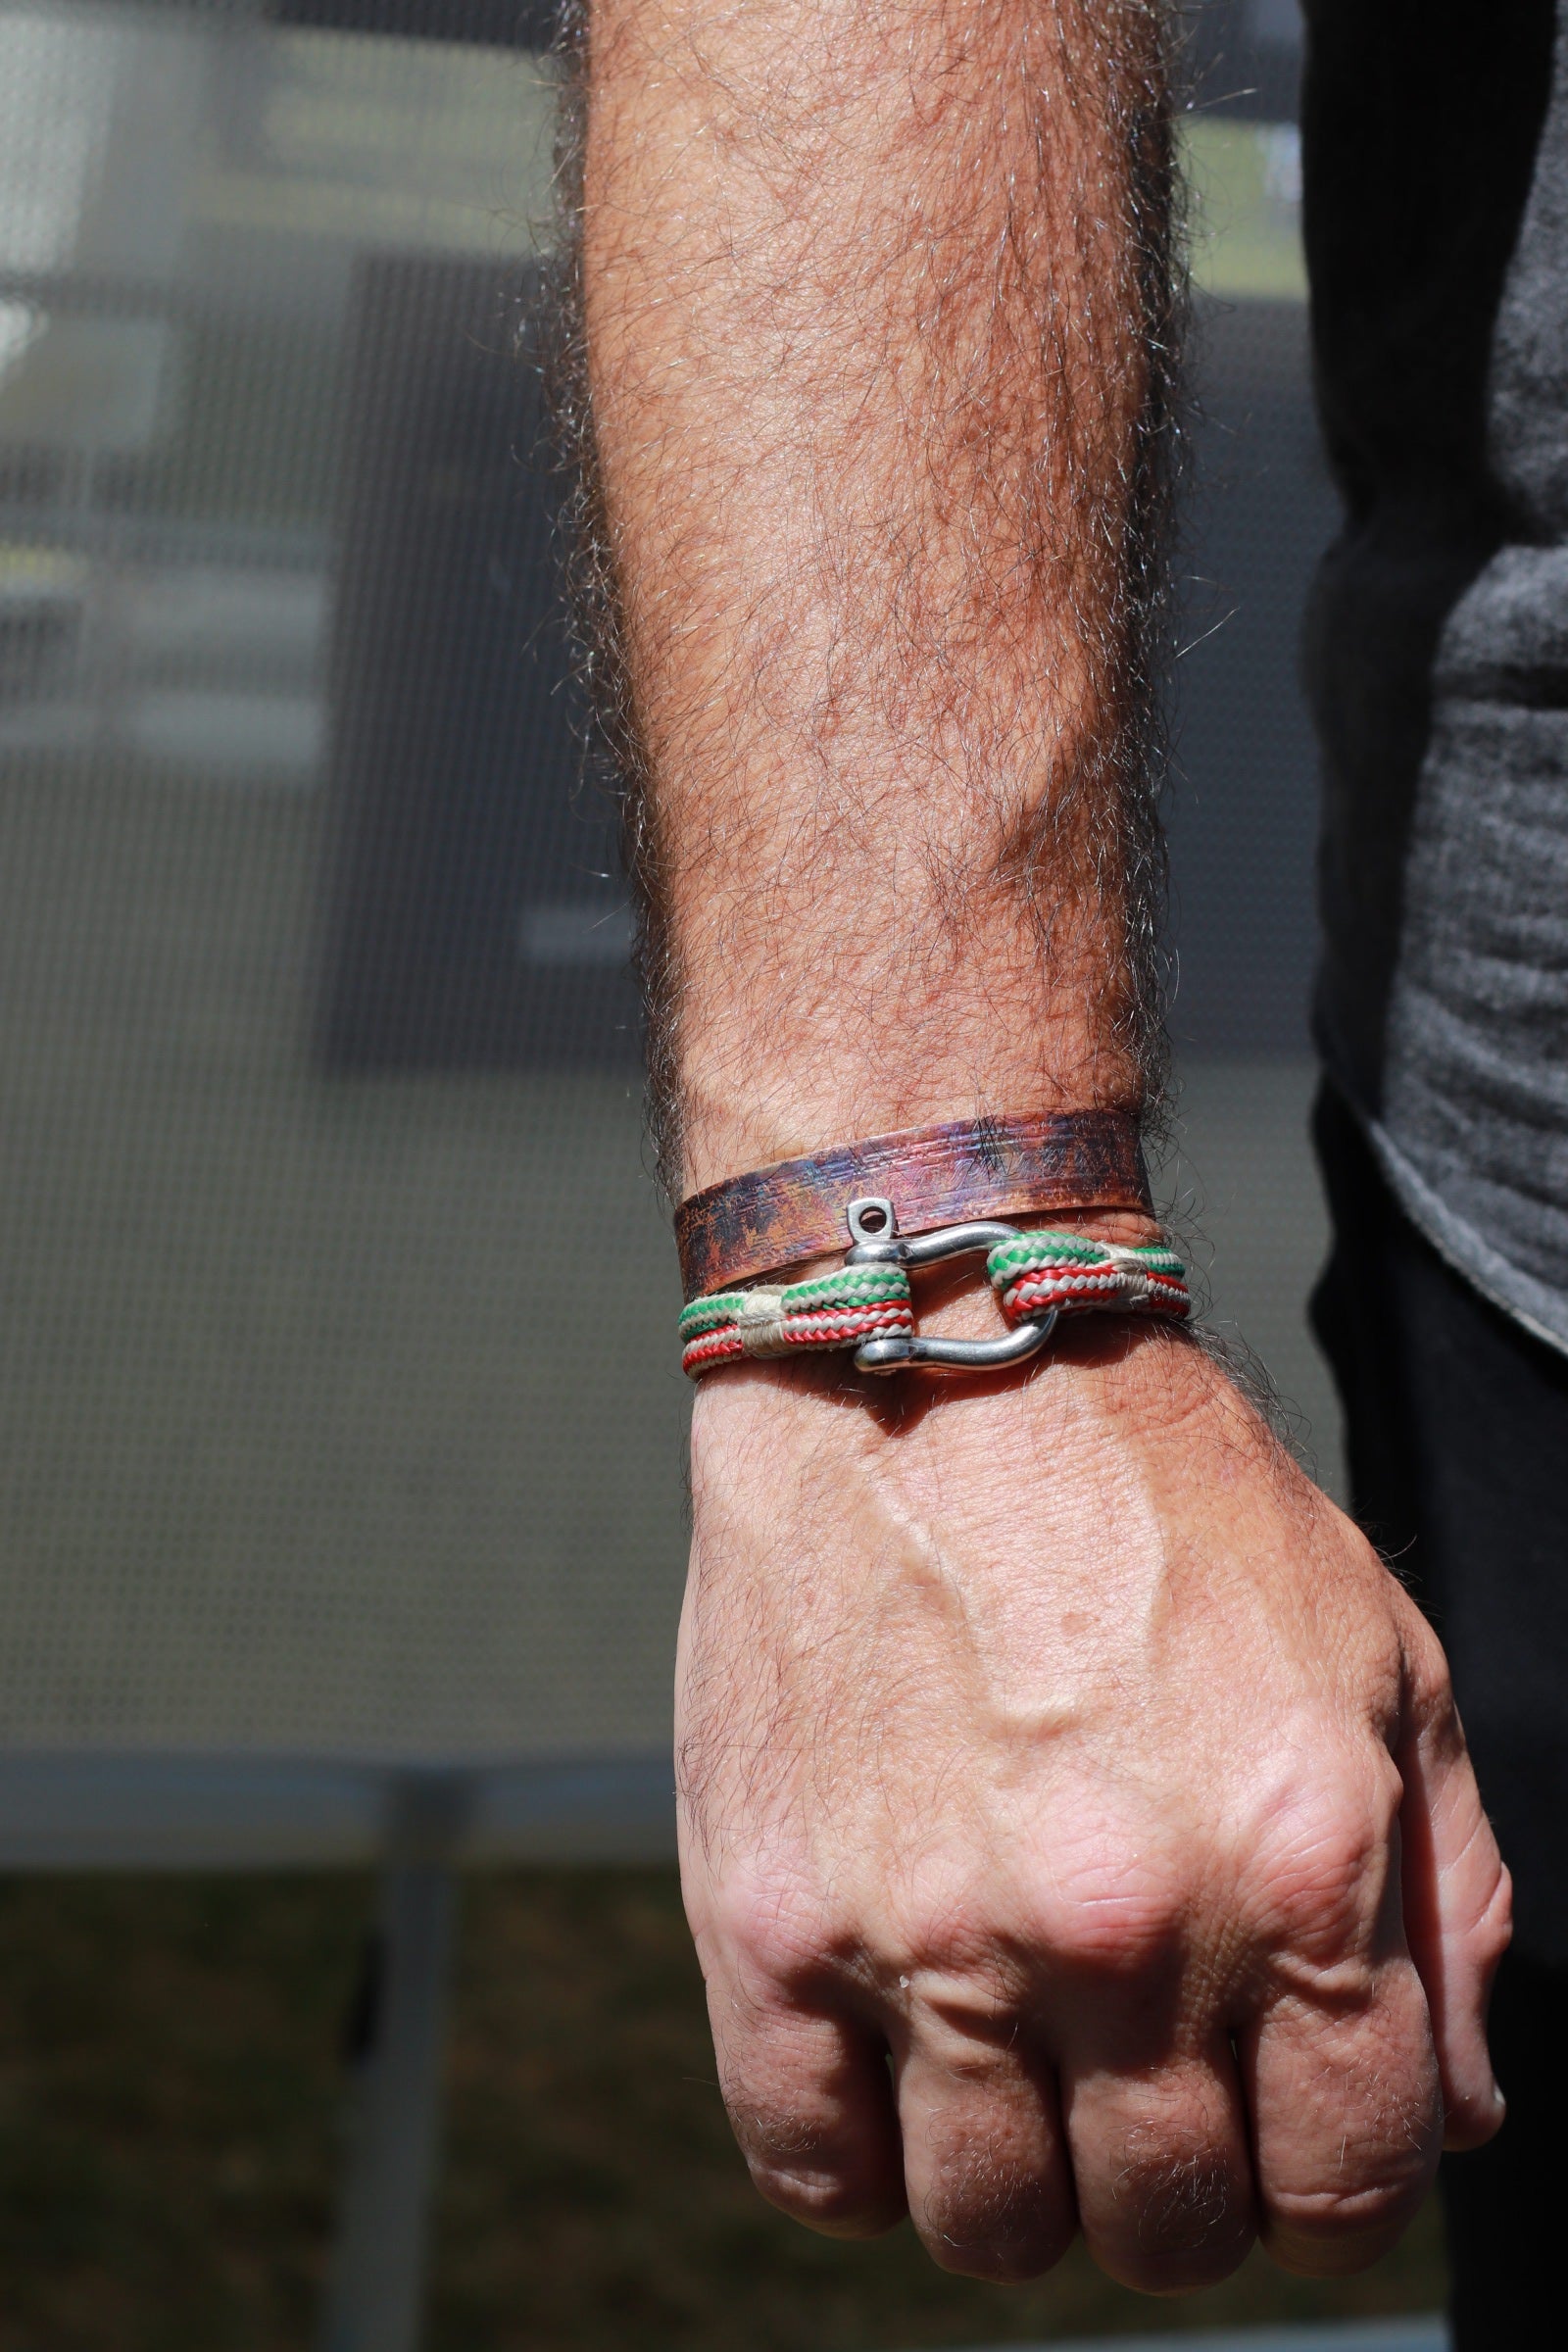 flame painted copper cuff bracelets modeled on man's wrist